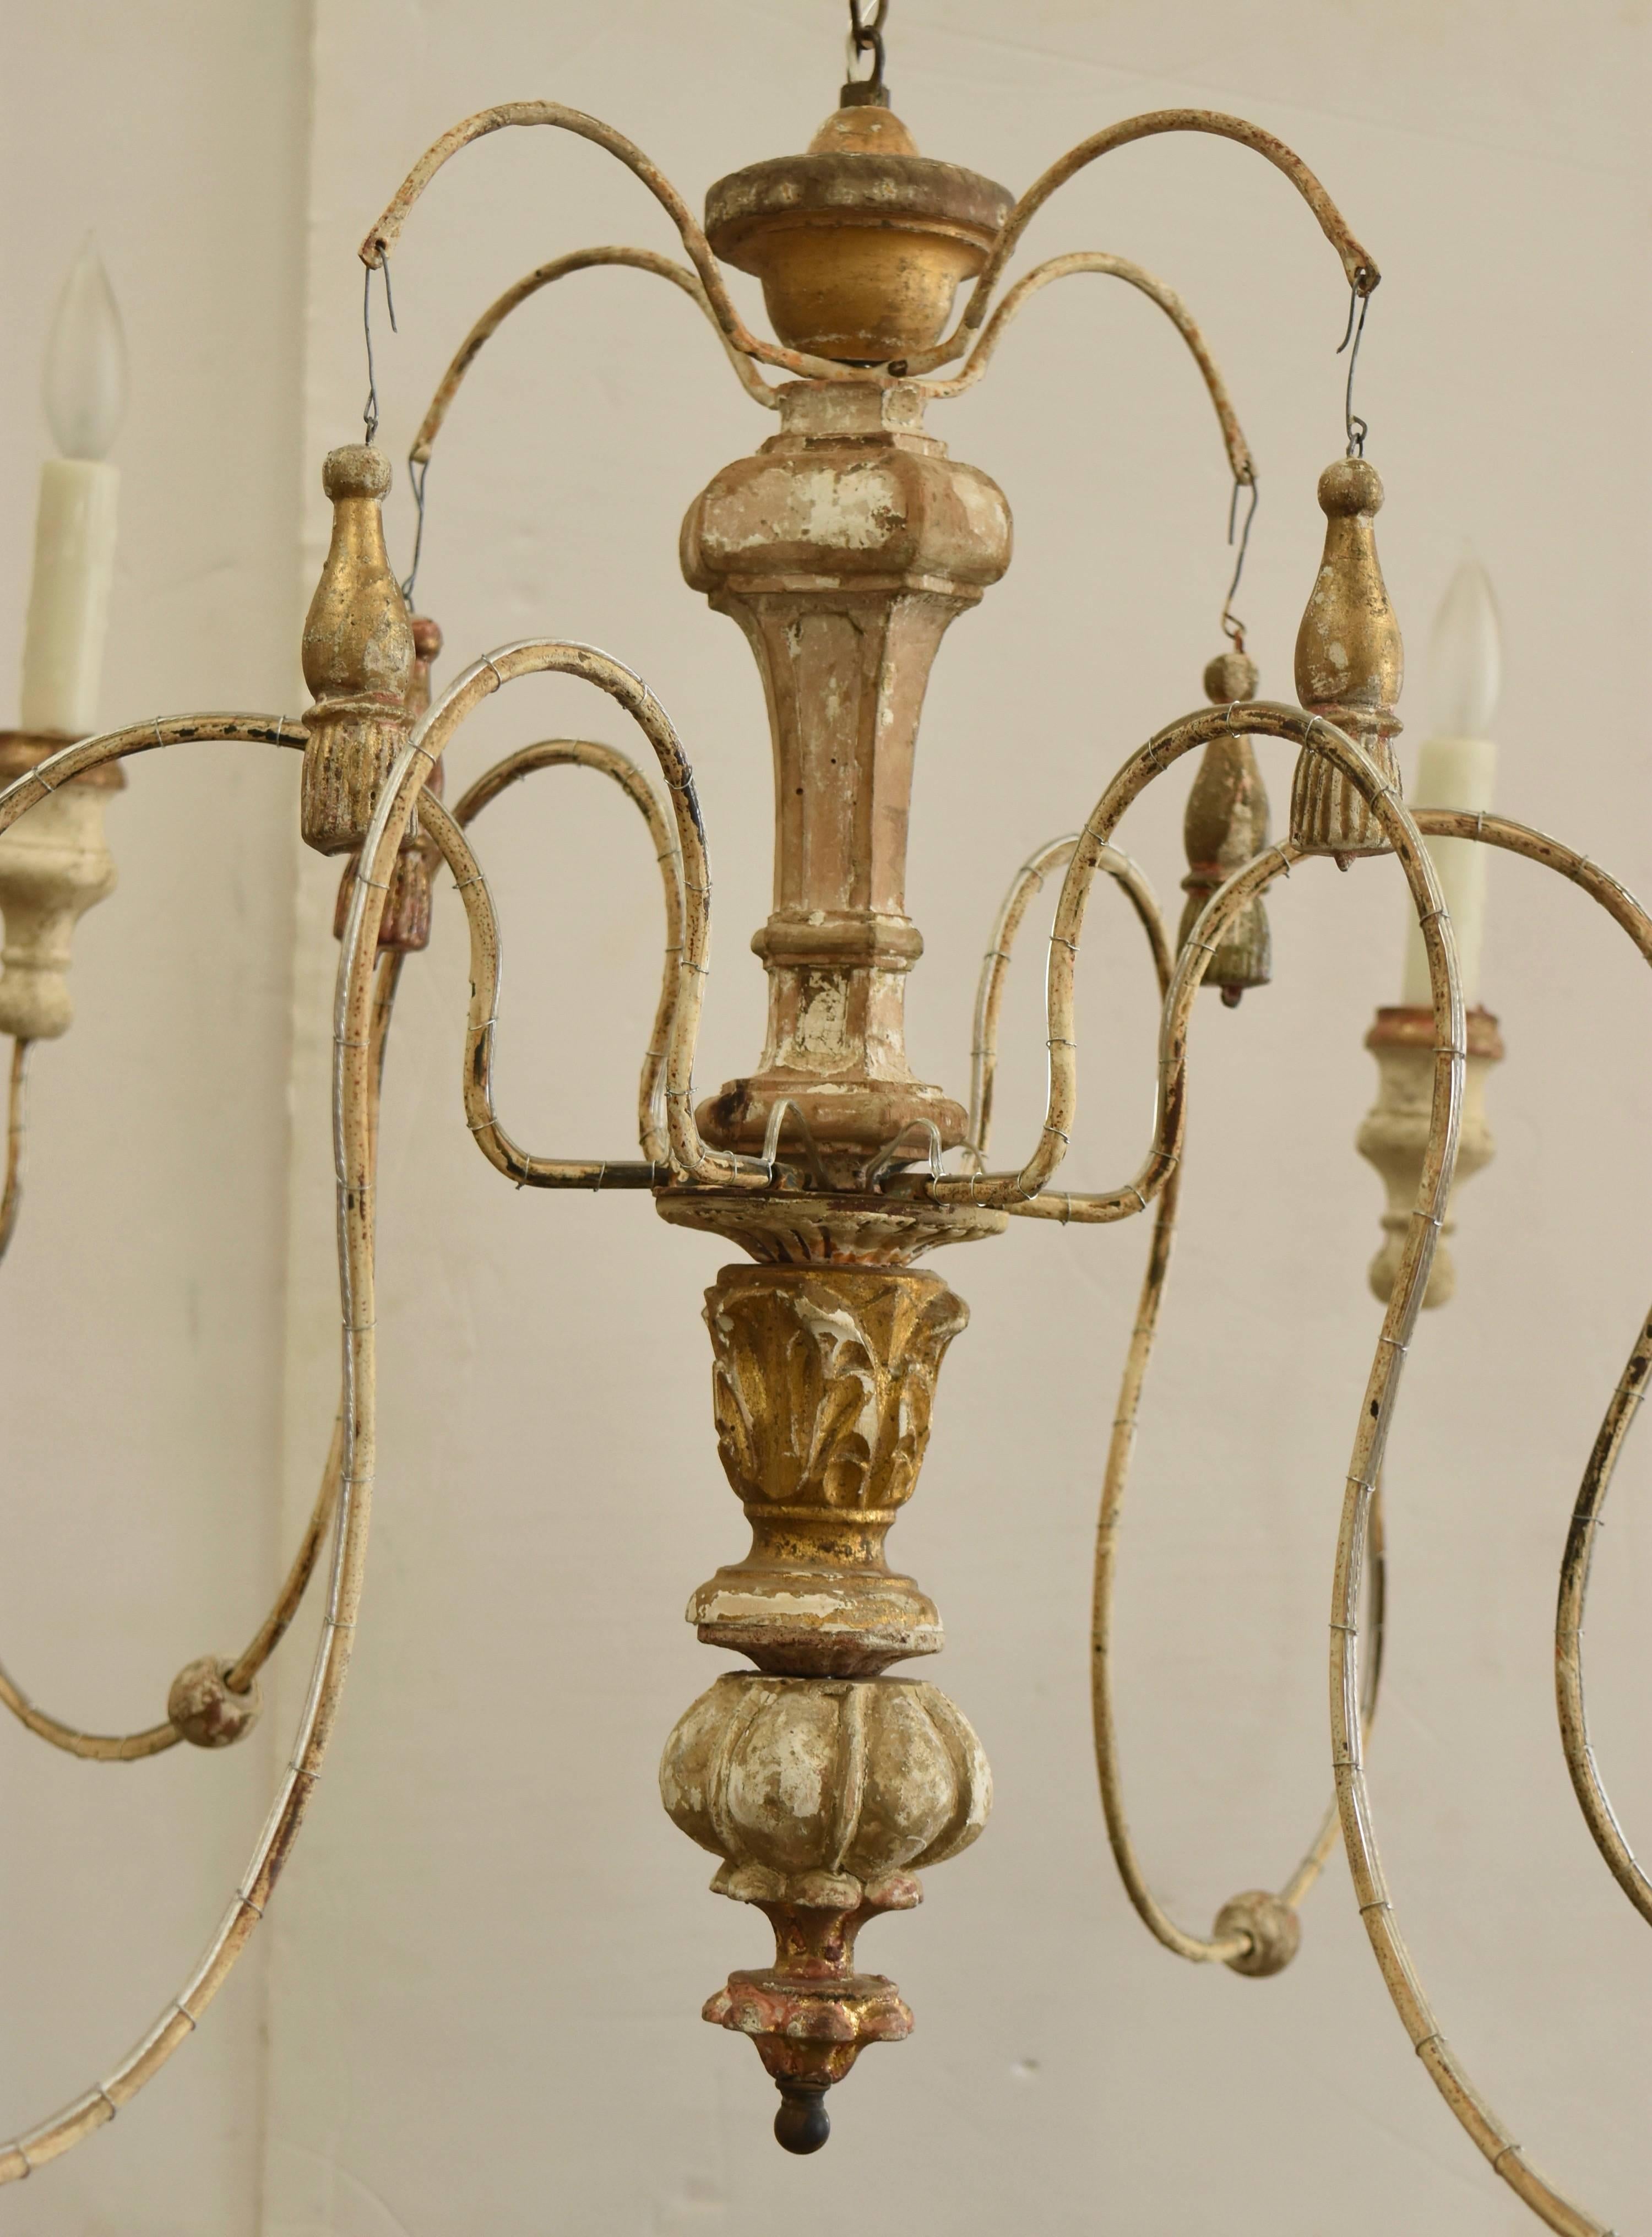 Hand-Crafted Italian Spider Six-Arm Chandelier Composed of 18th Century Elements and Iron